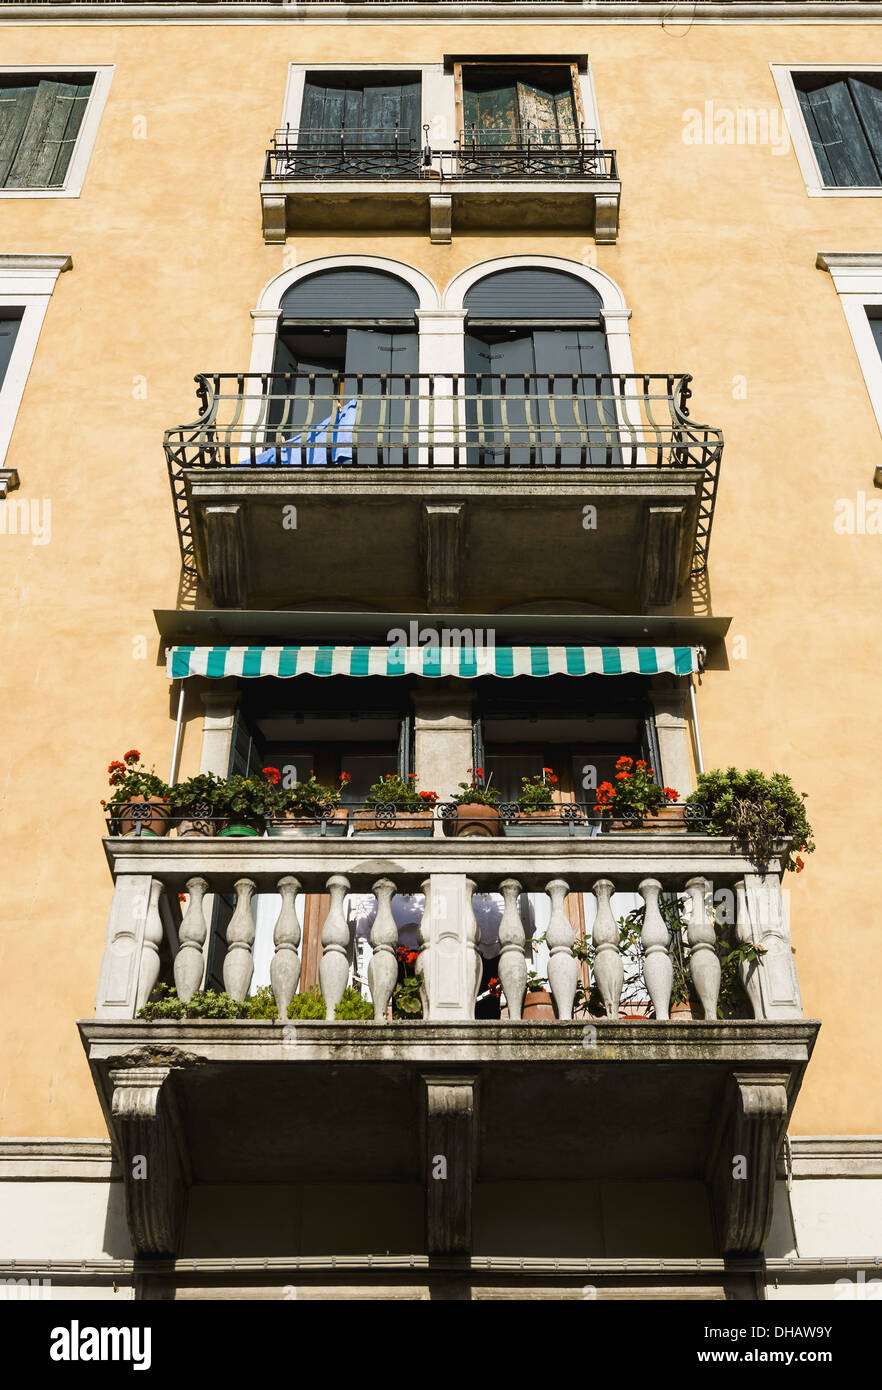 Architectural Details On A Building; Venice, Italy Stock Photo